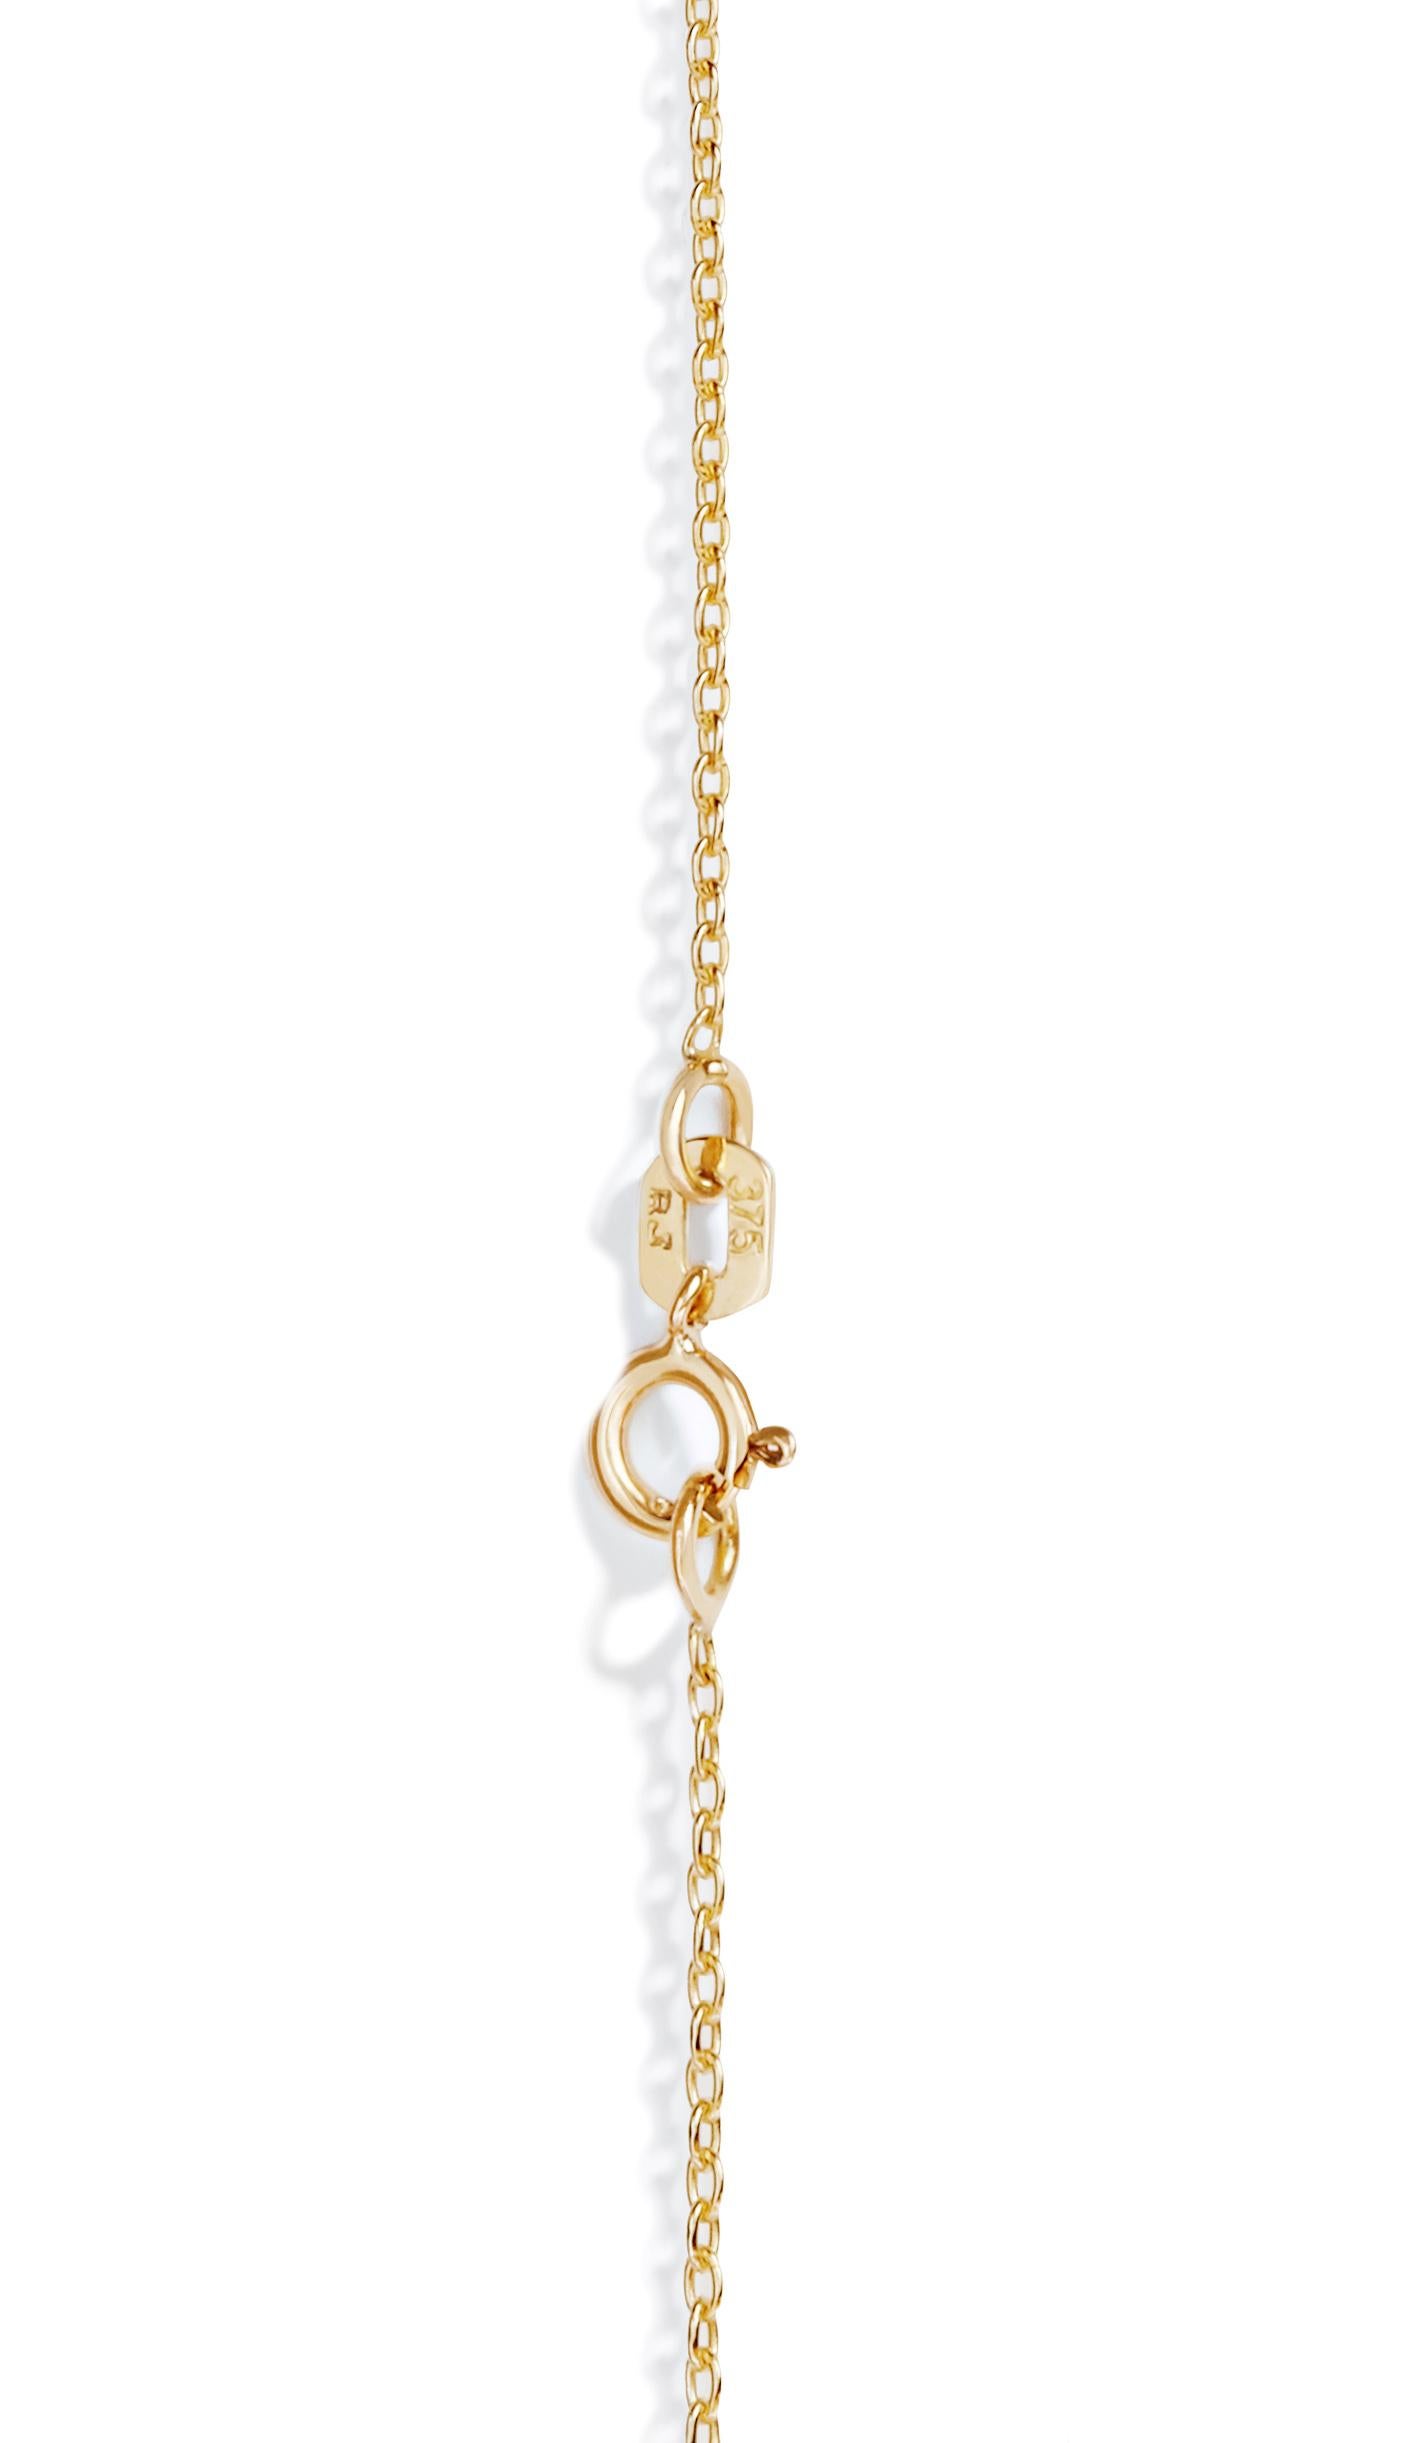 This necklace features a delicate faceted pink sapphire briolette strung on a fine 16-inch chain.  The 9-carat yellow gold chain is hallmarked and total sapphire carat weight is approximately 0.2 carat. 

Handmade in London. 